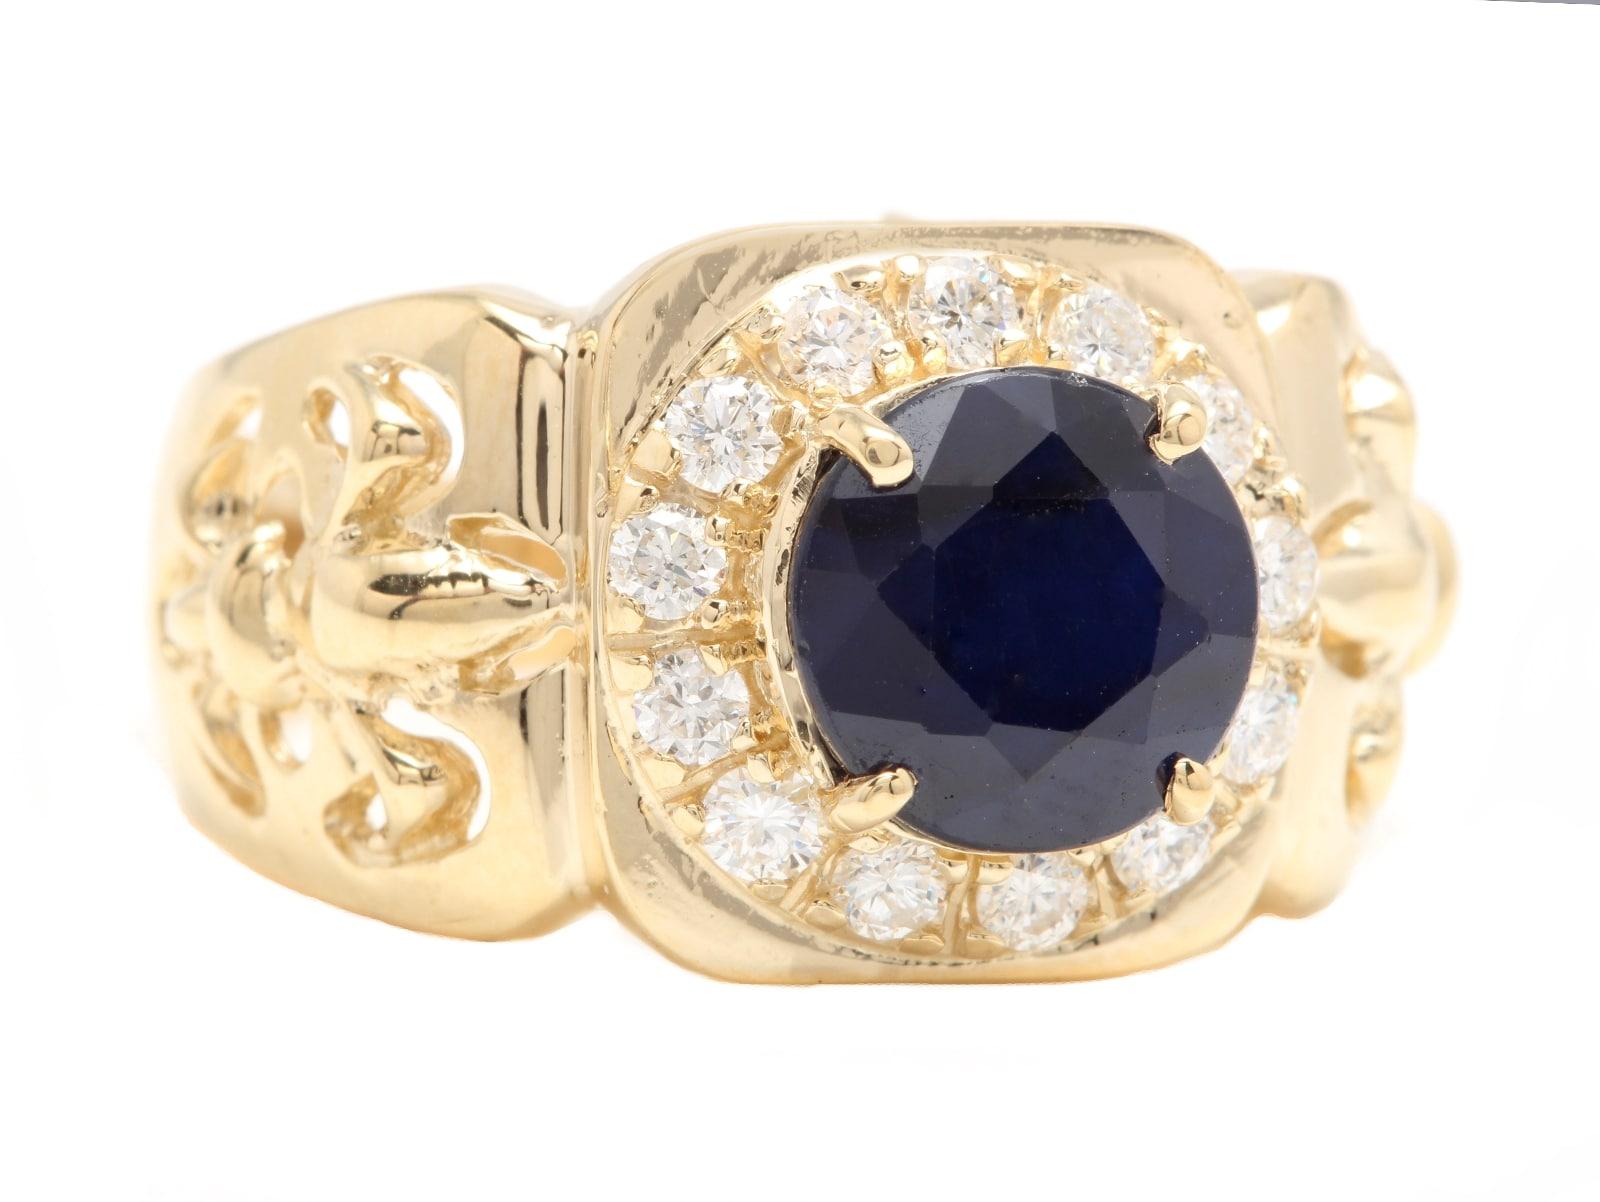 5.10 Carats Natural Diamond & Blue Sapphire 14K Solid Yellow Gold Men's Ring

Amazing looking piece! 

Suggested Replacement Value: $6,000.00

Total Natural Round Cut Diamonds Weight: Approx. 0.60 Carats (color G-H / Clarity SI1-SI2)

Total Natural